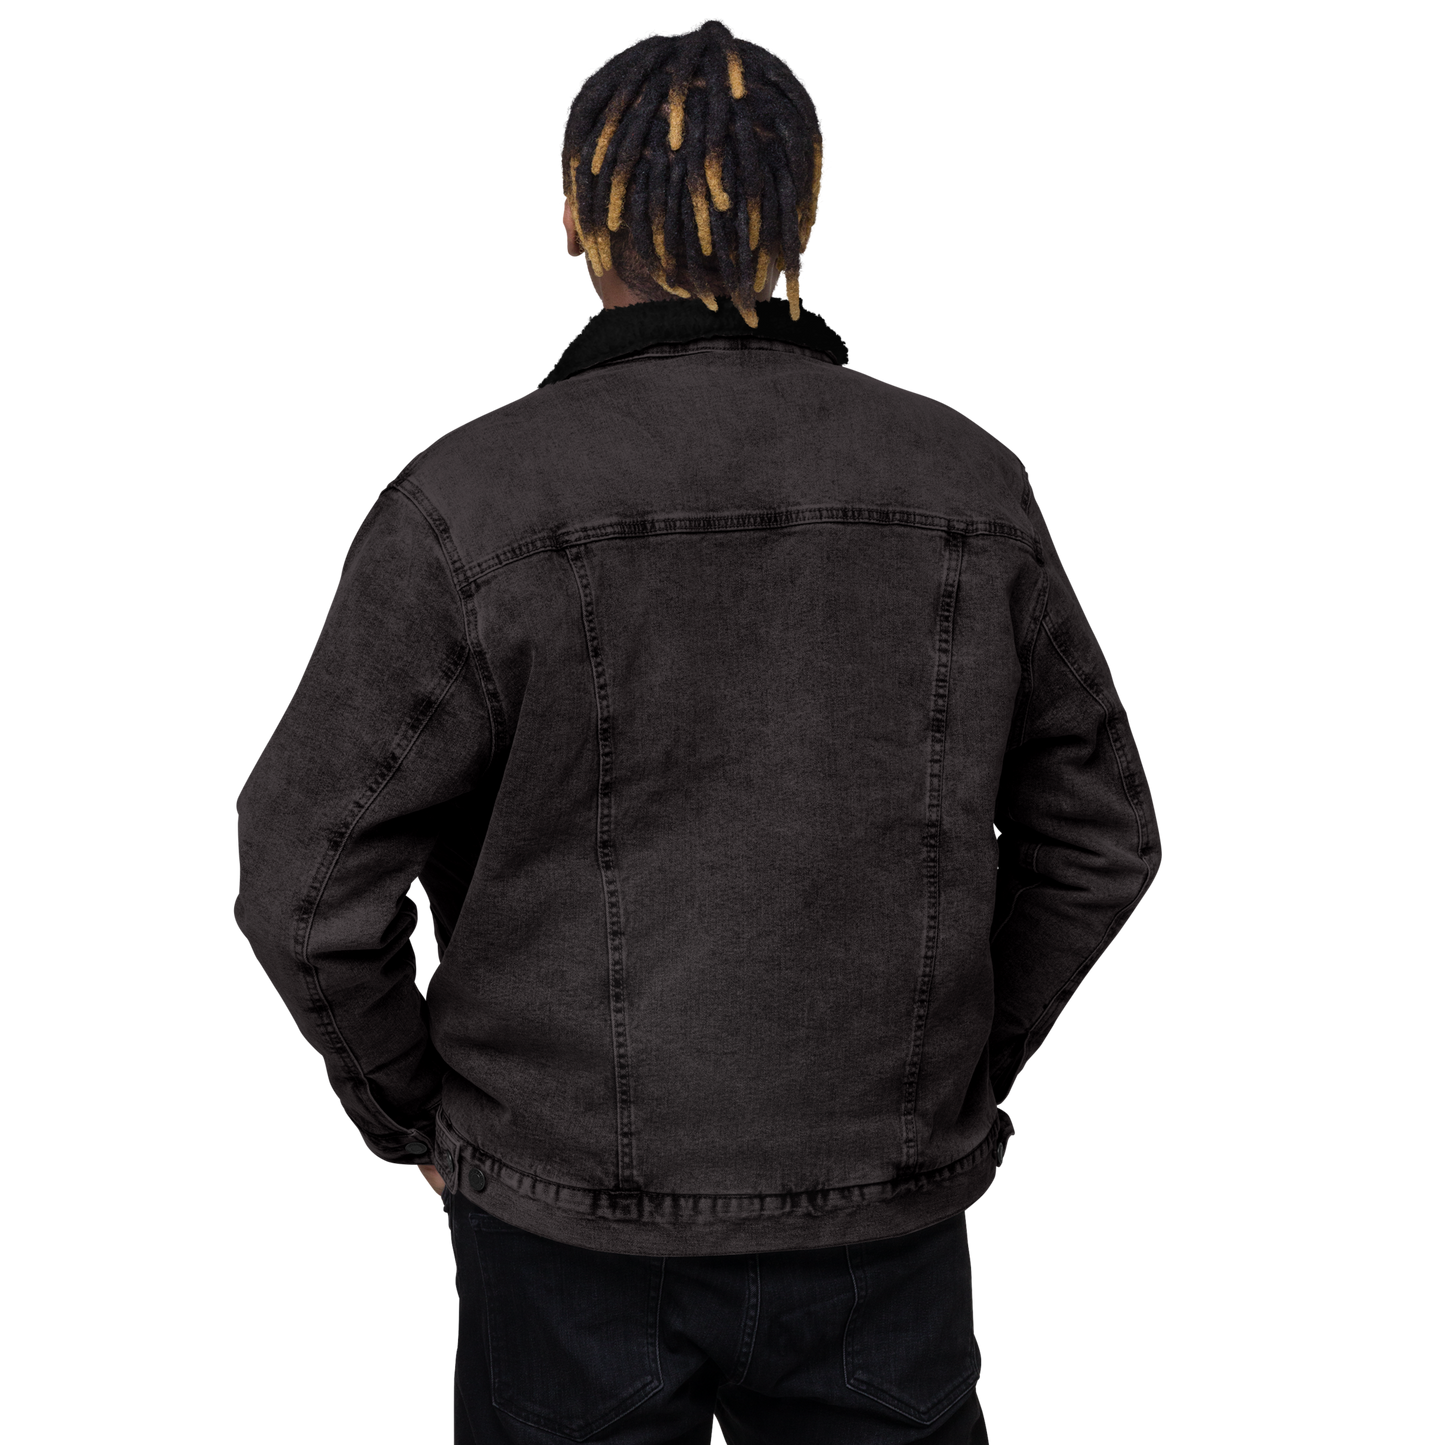 YHM Designs - YUL Montreal Denim Sherpa Jacket - Crossed-X Design with Airport Code and Vintage Propliner - Black & White Embroidery - Image 09